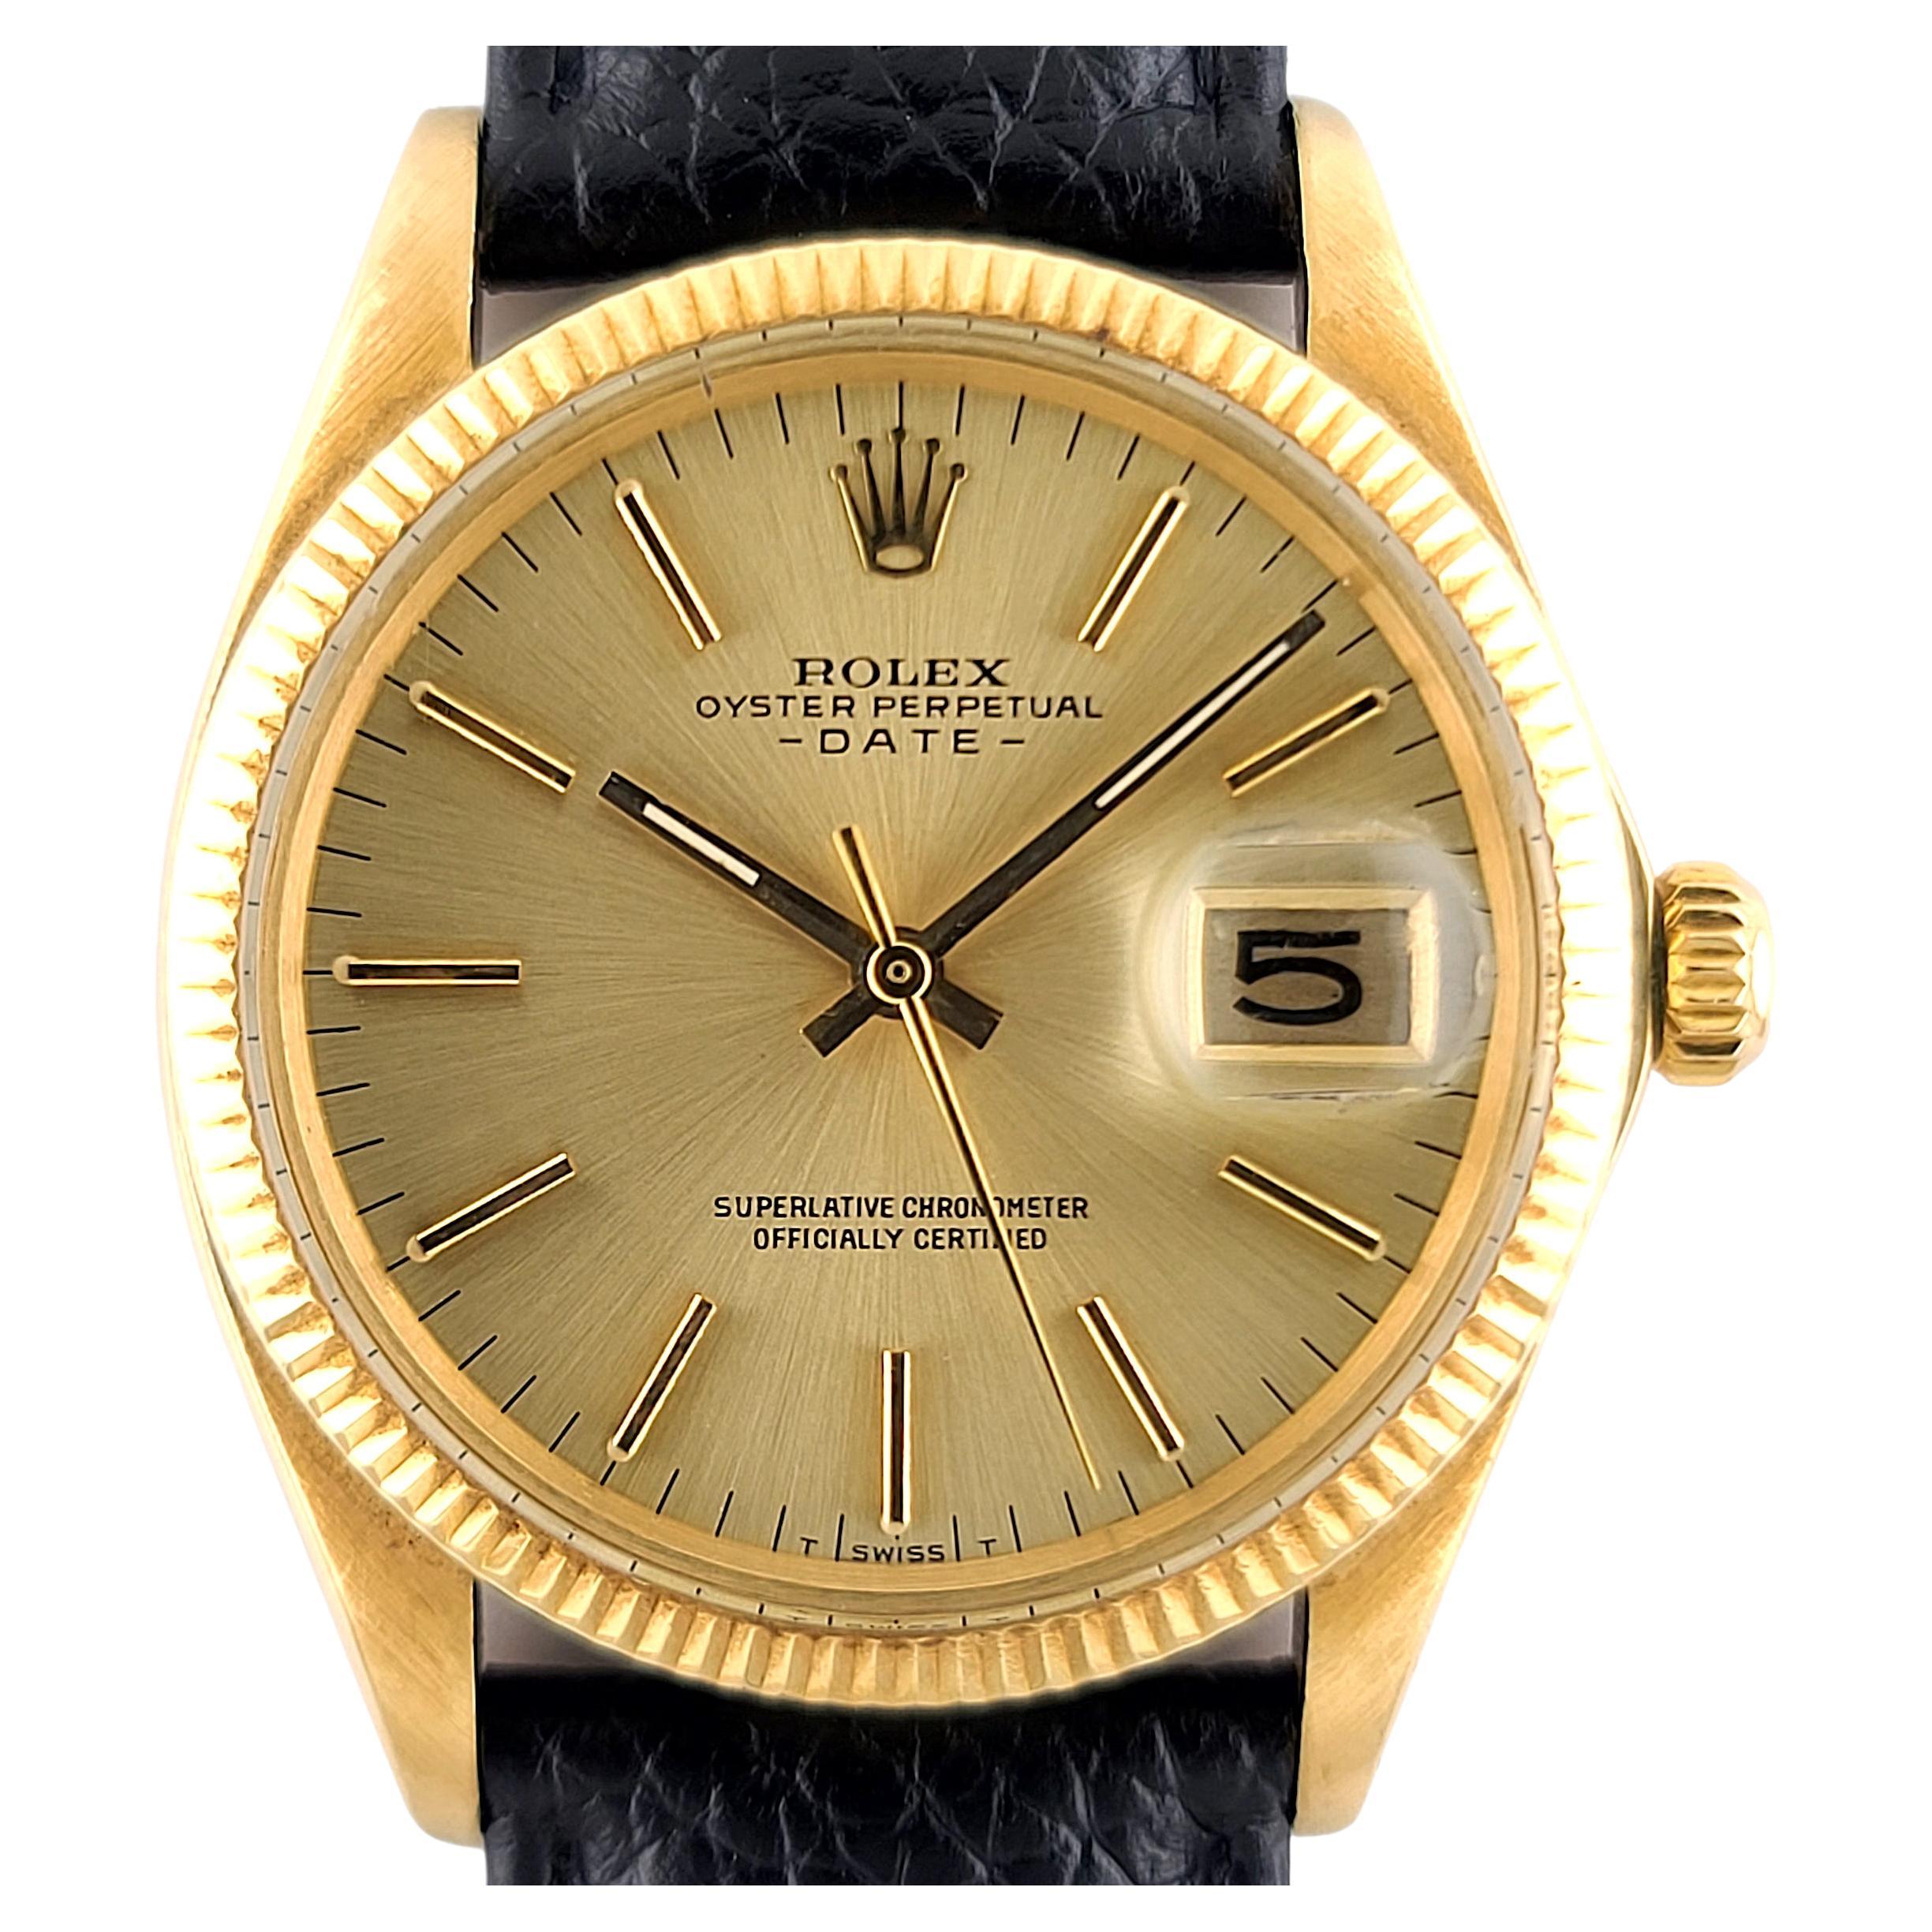 Rolex Oyster Perpetual Date 1503 Gold Sunburst Dial Solid Gold 14k Gold, 1973 For Sale